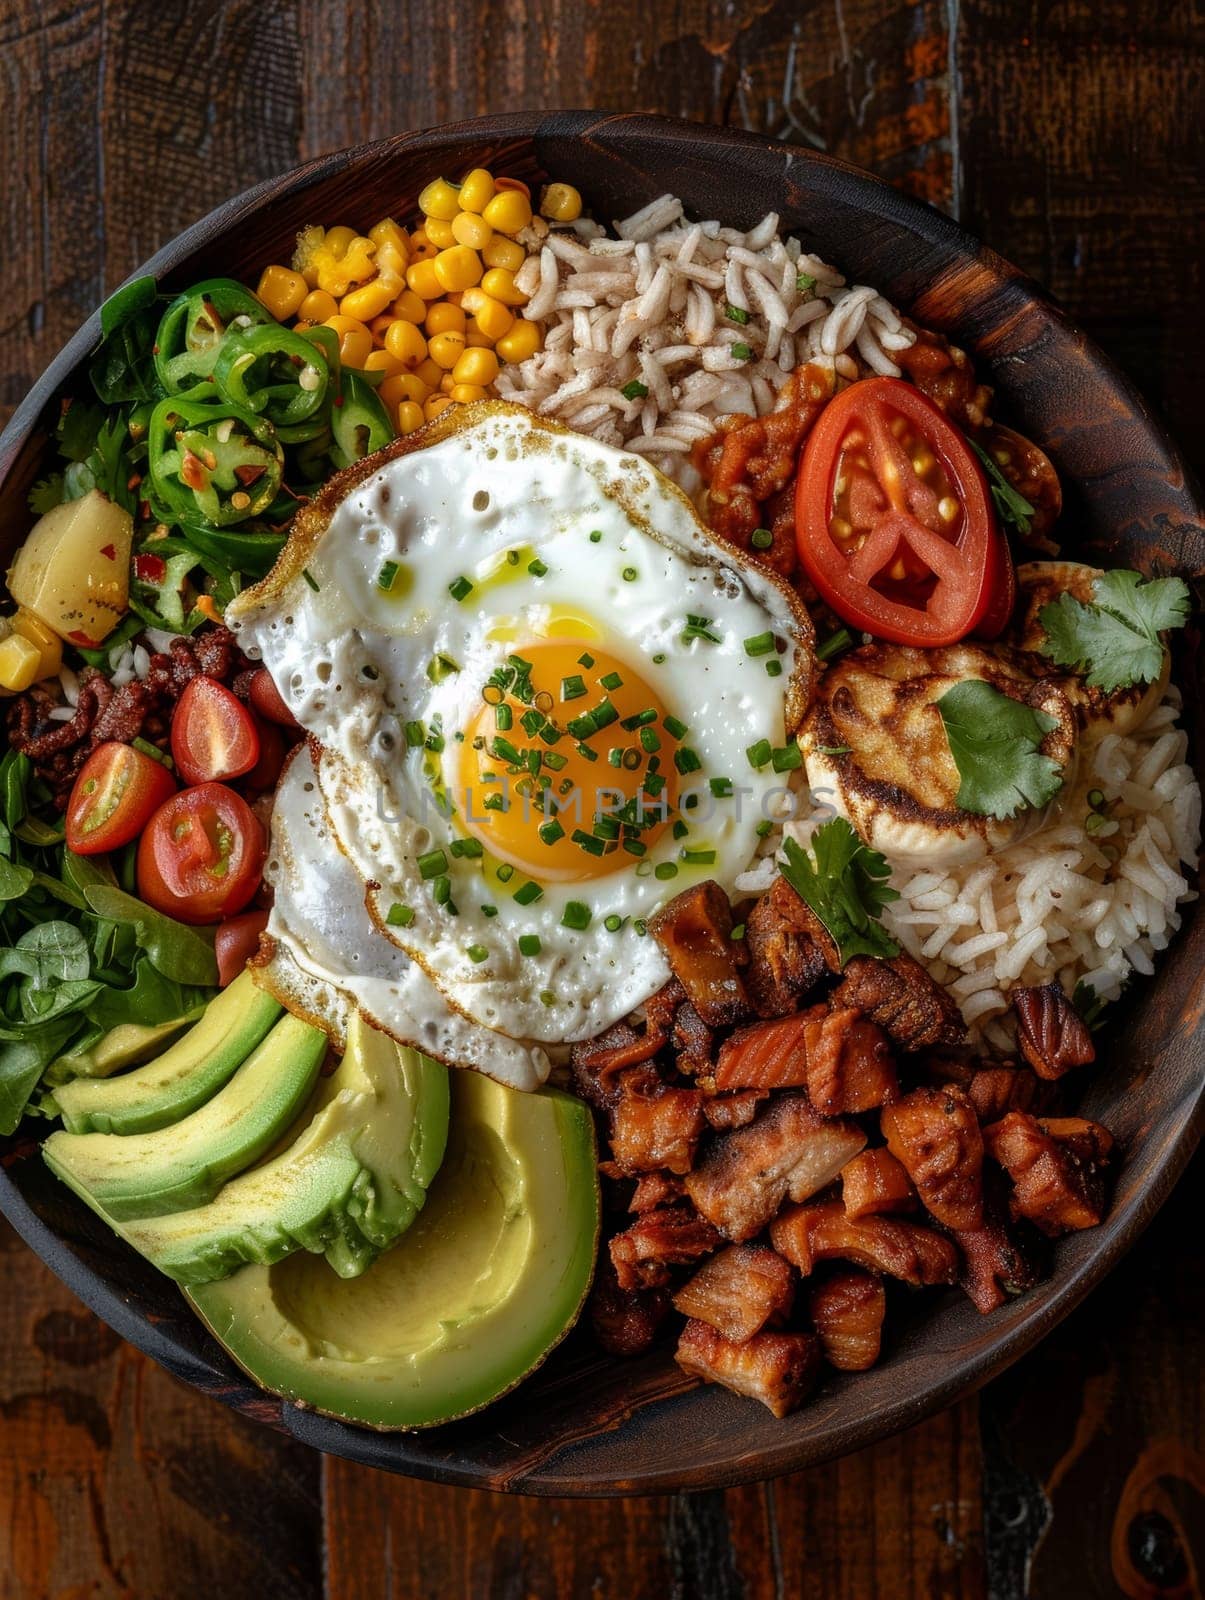 Bandeja paisa, a traditional Colombian platter featuring a hearty and flavorful assortment of beans, rice, pork, avocado, and a fried egg, presented on a large round dish. by sfinks